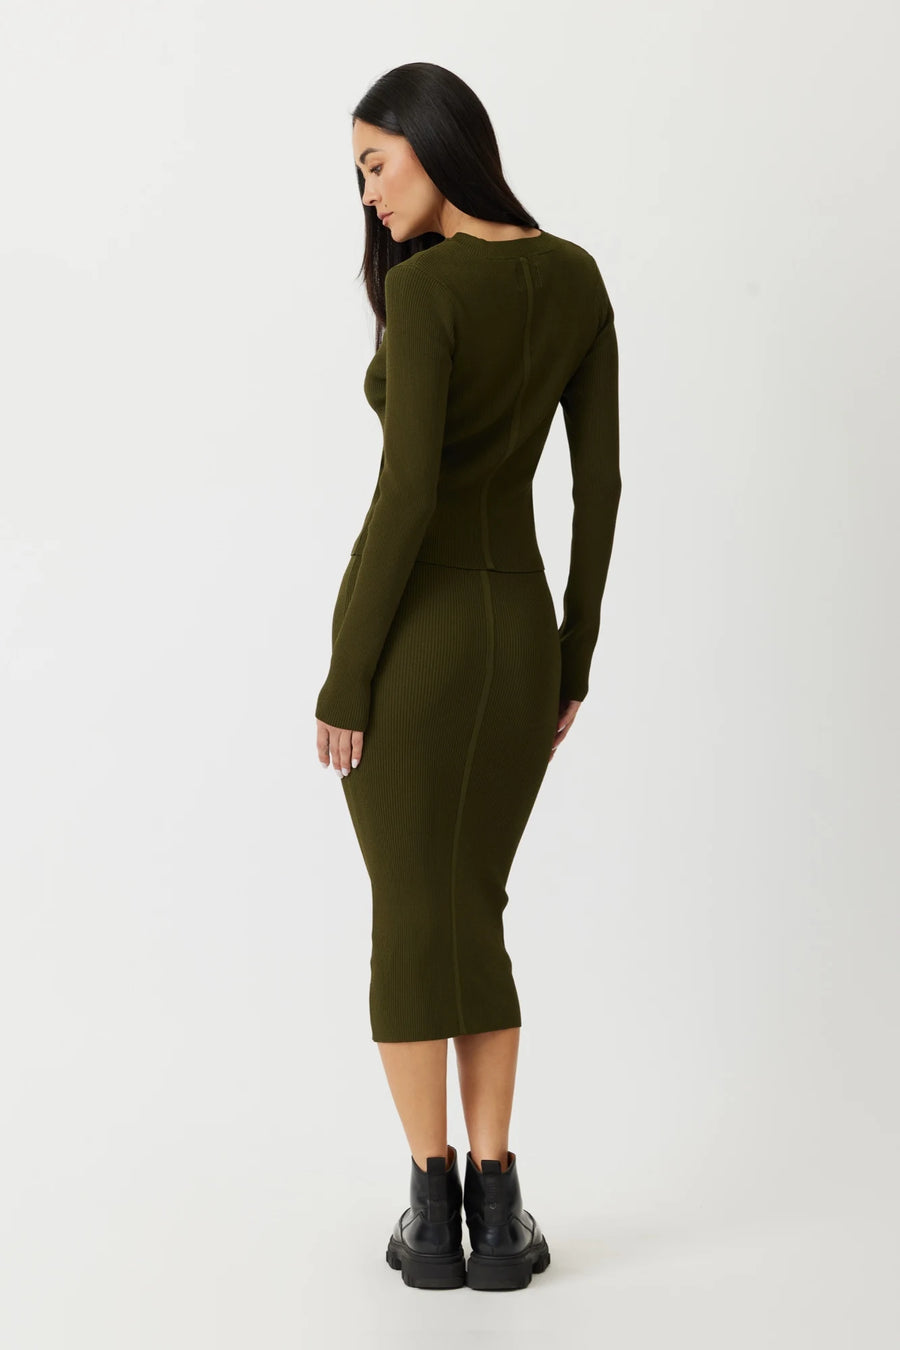 The Gale midi skirt in army green by Greyven